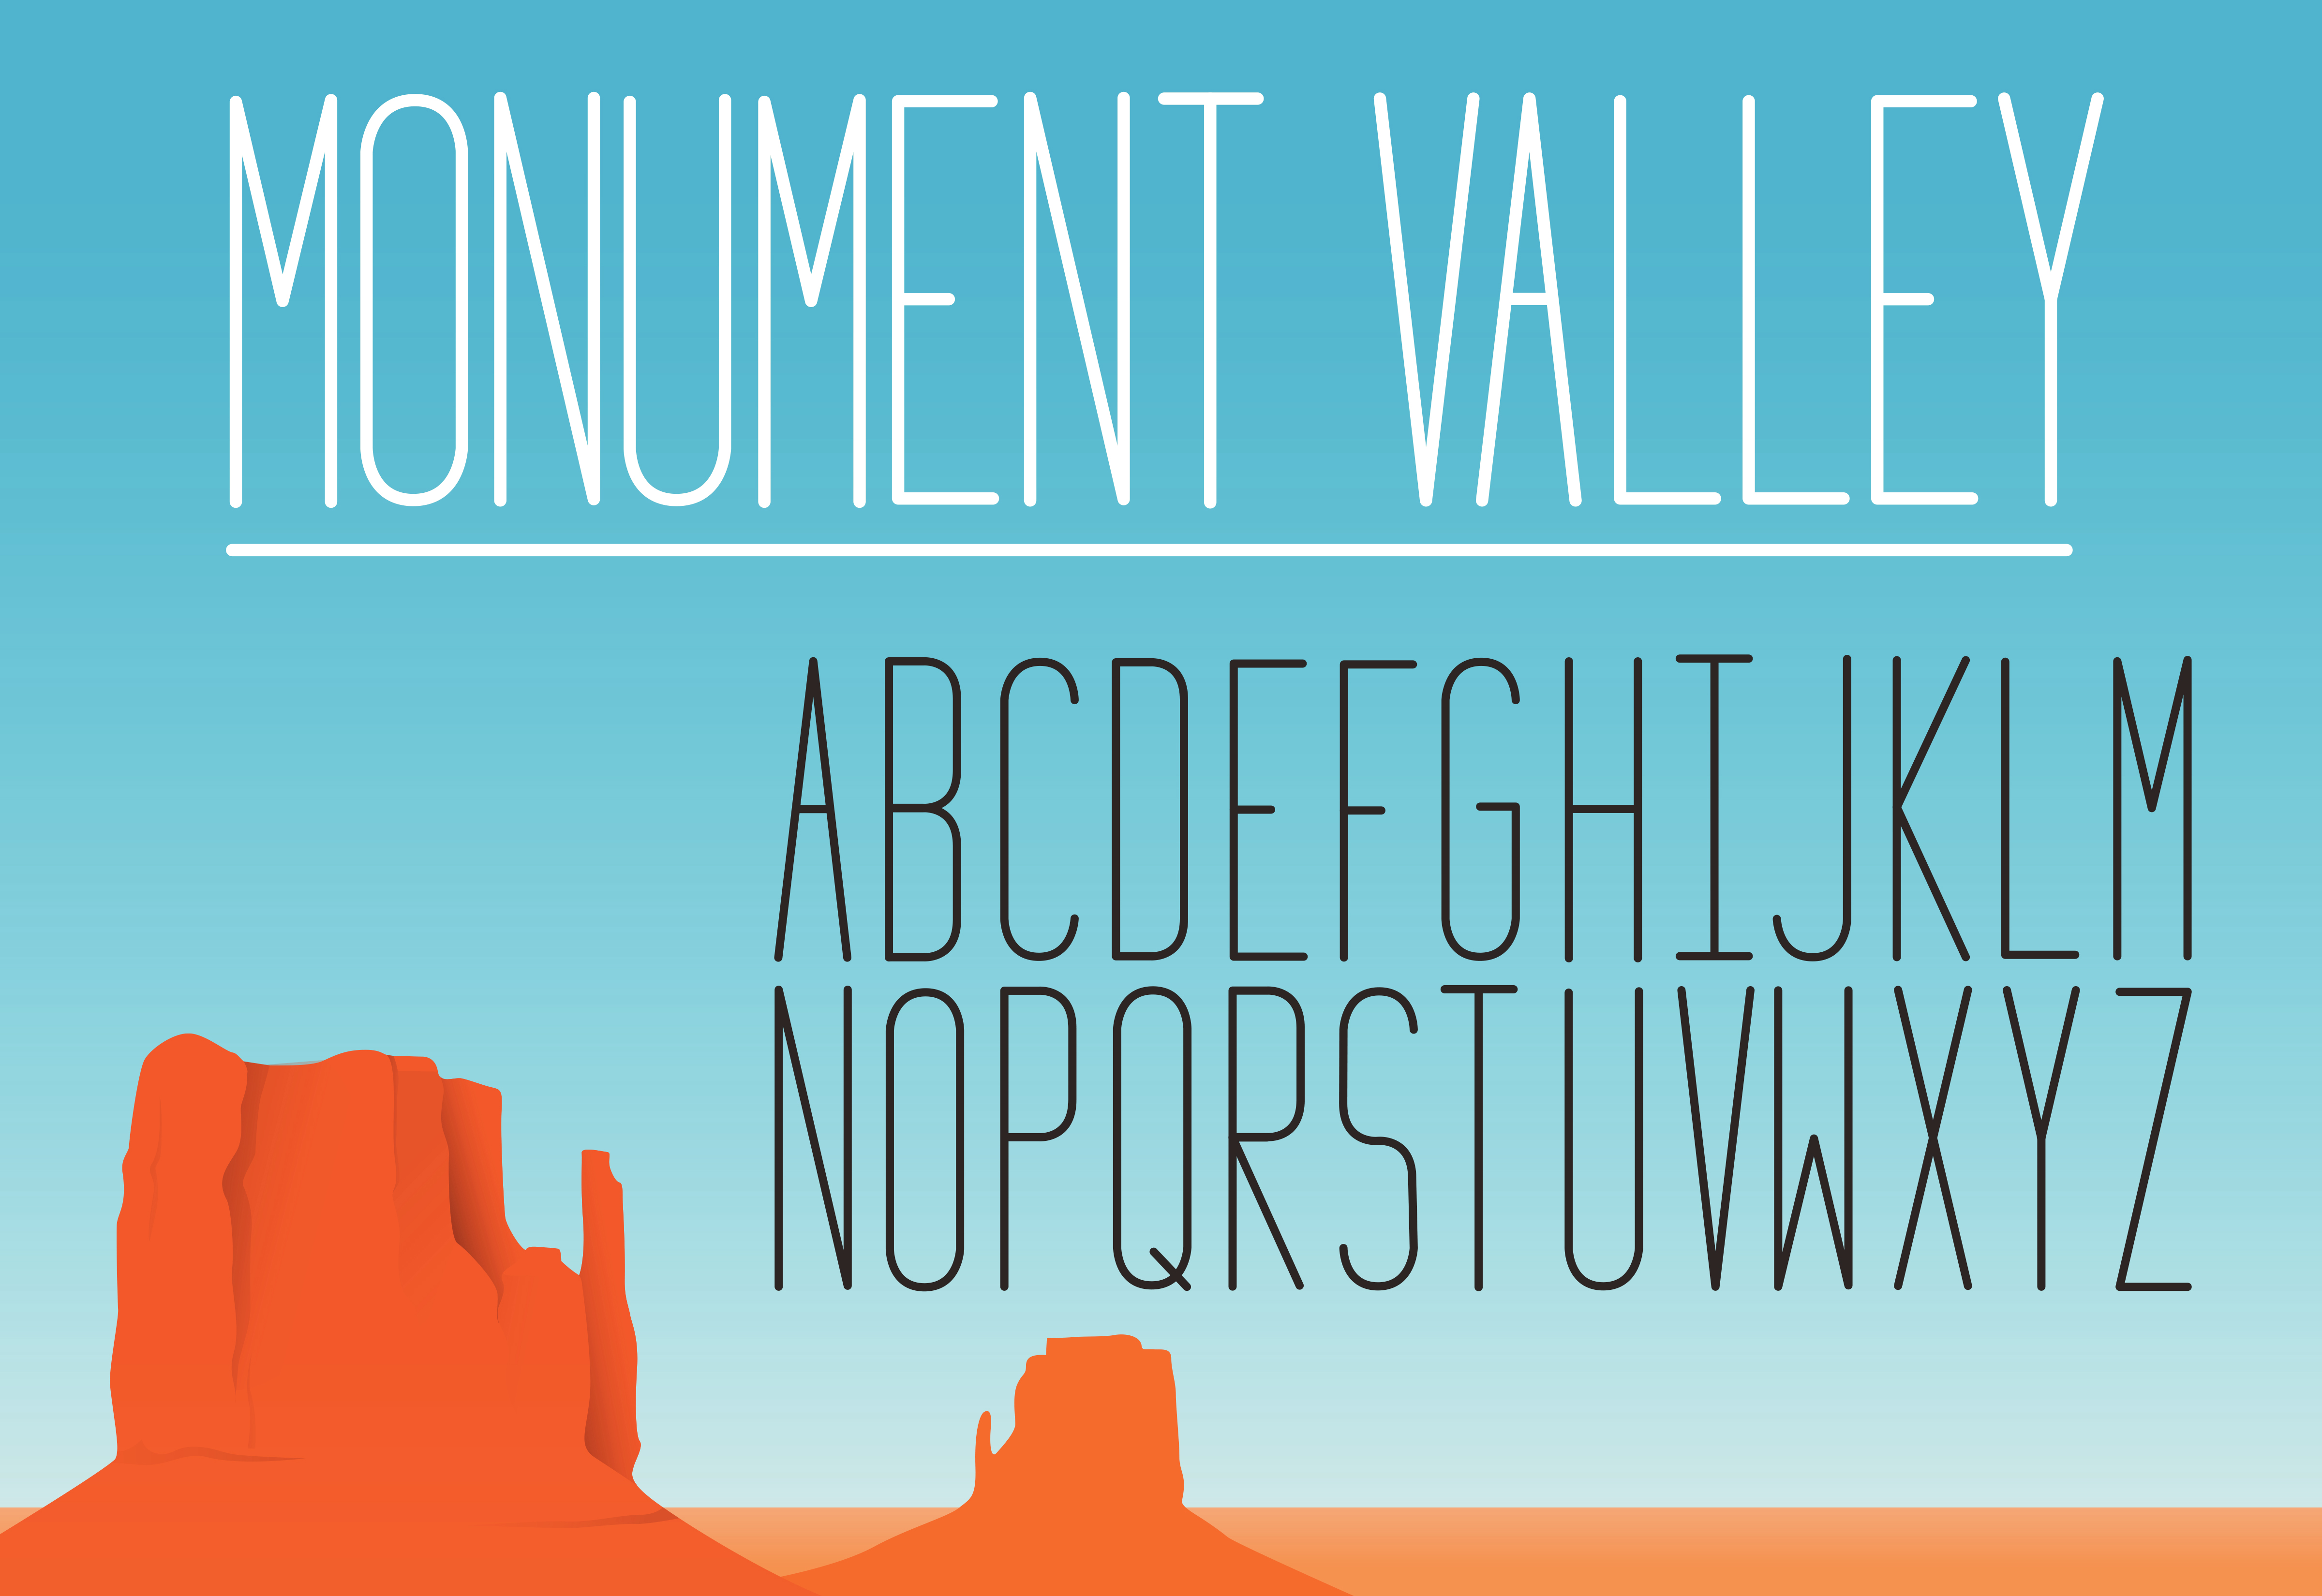 Monument_Valley_1.2